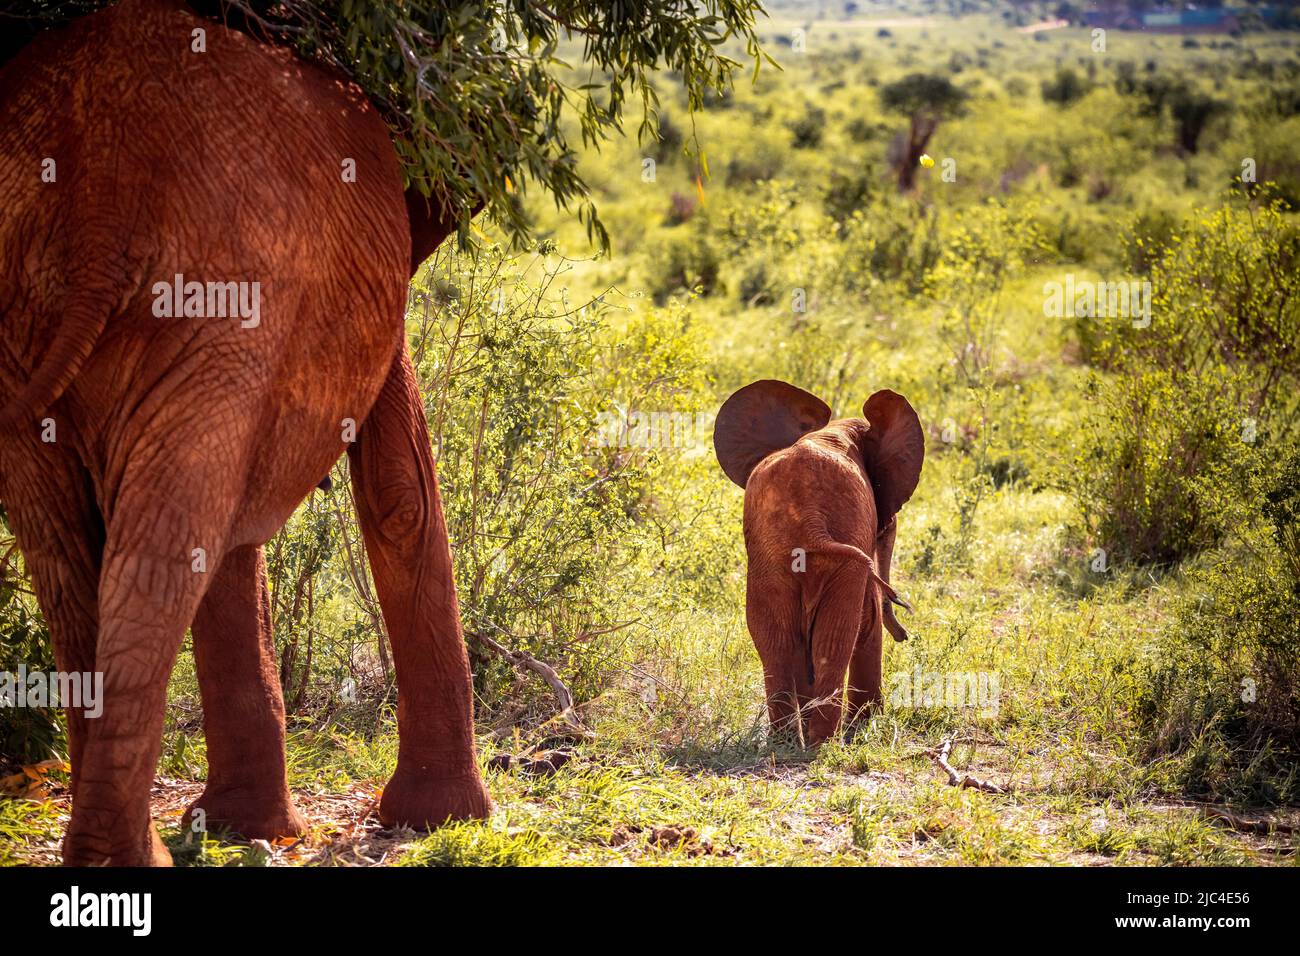 African elephant (Loxodonta africana) with child running away, mammals, close-up in Tsavo East National Park, Kenya, East Africa Stock Photo